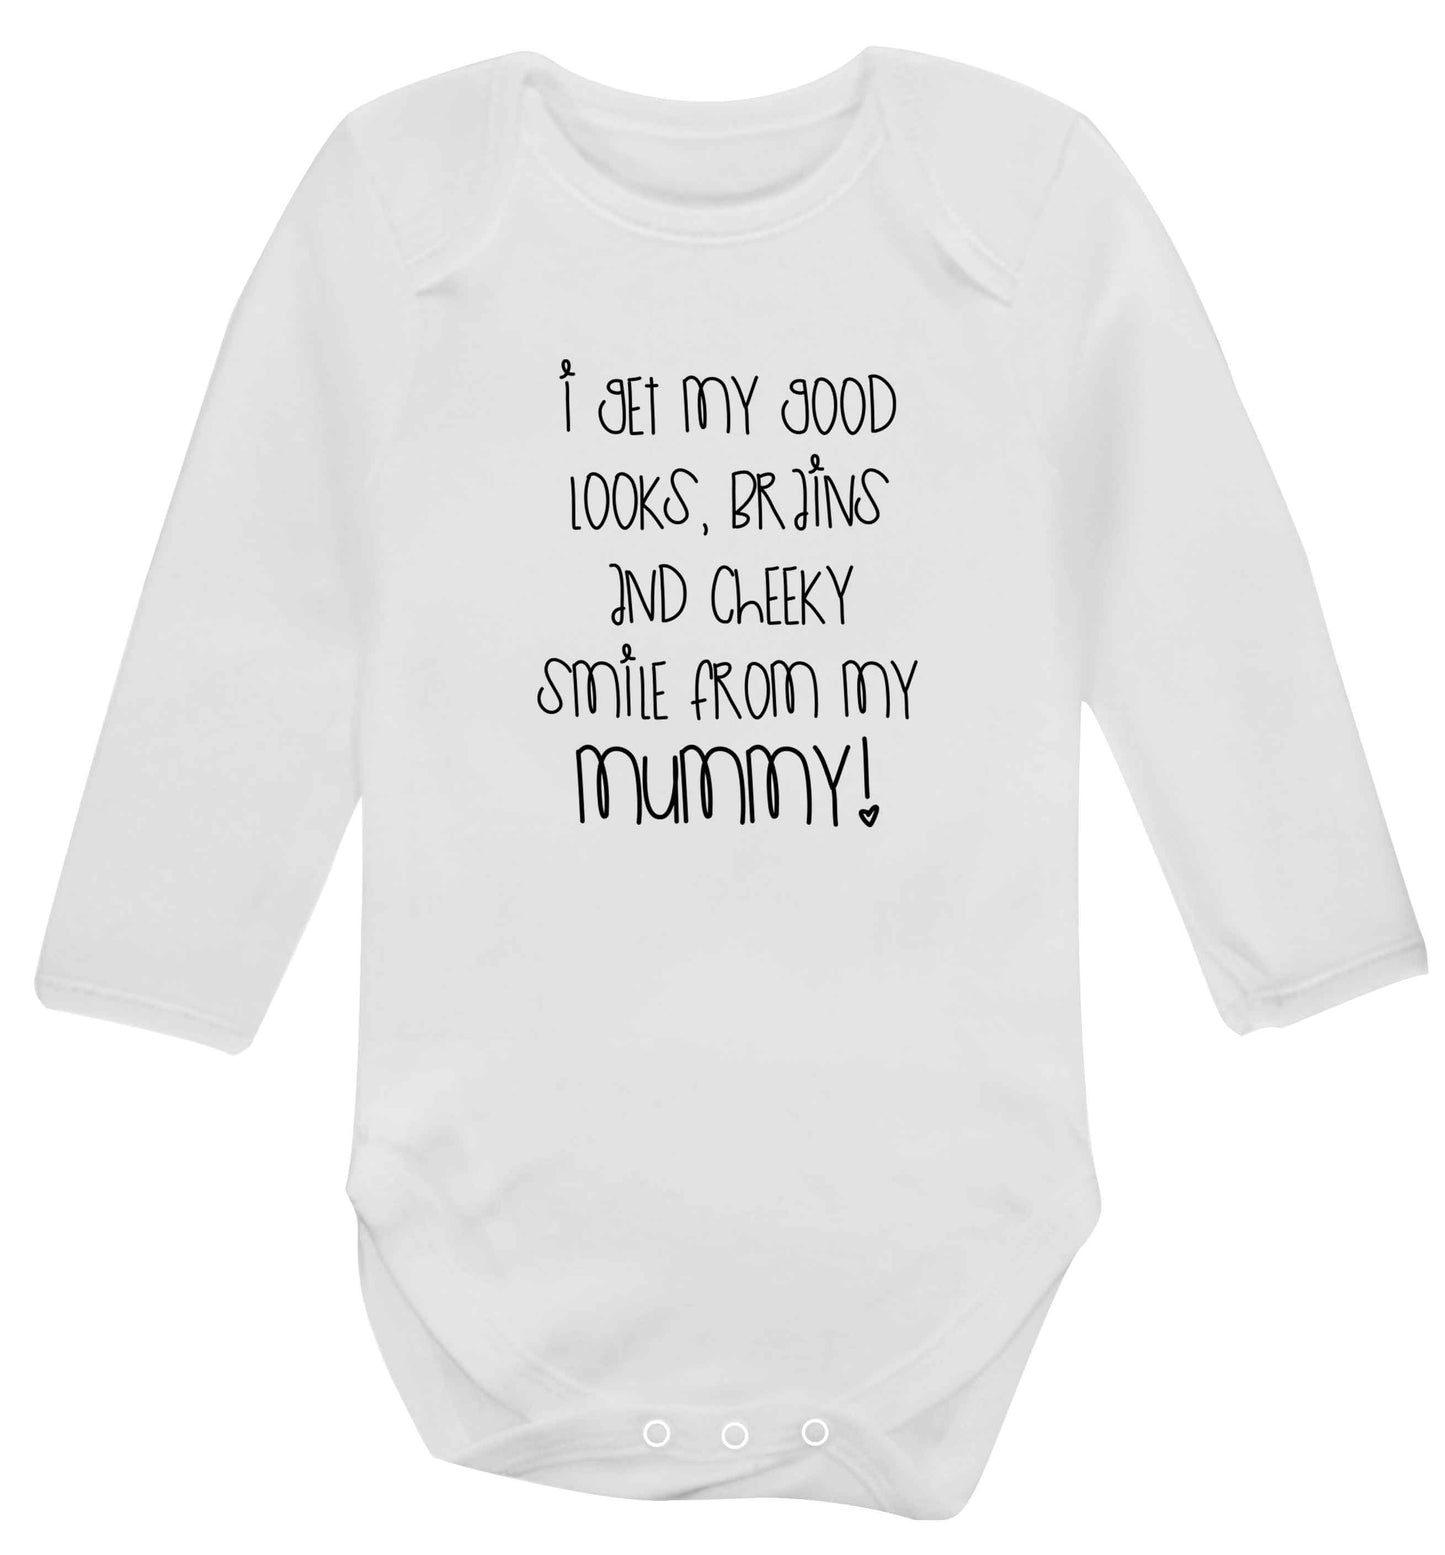 I get my good looks, brains and cheeky smile from my mummy baby vest long sleeved white 6-12 months